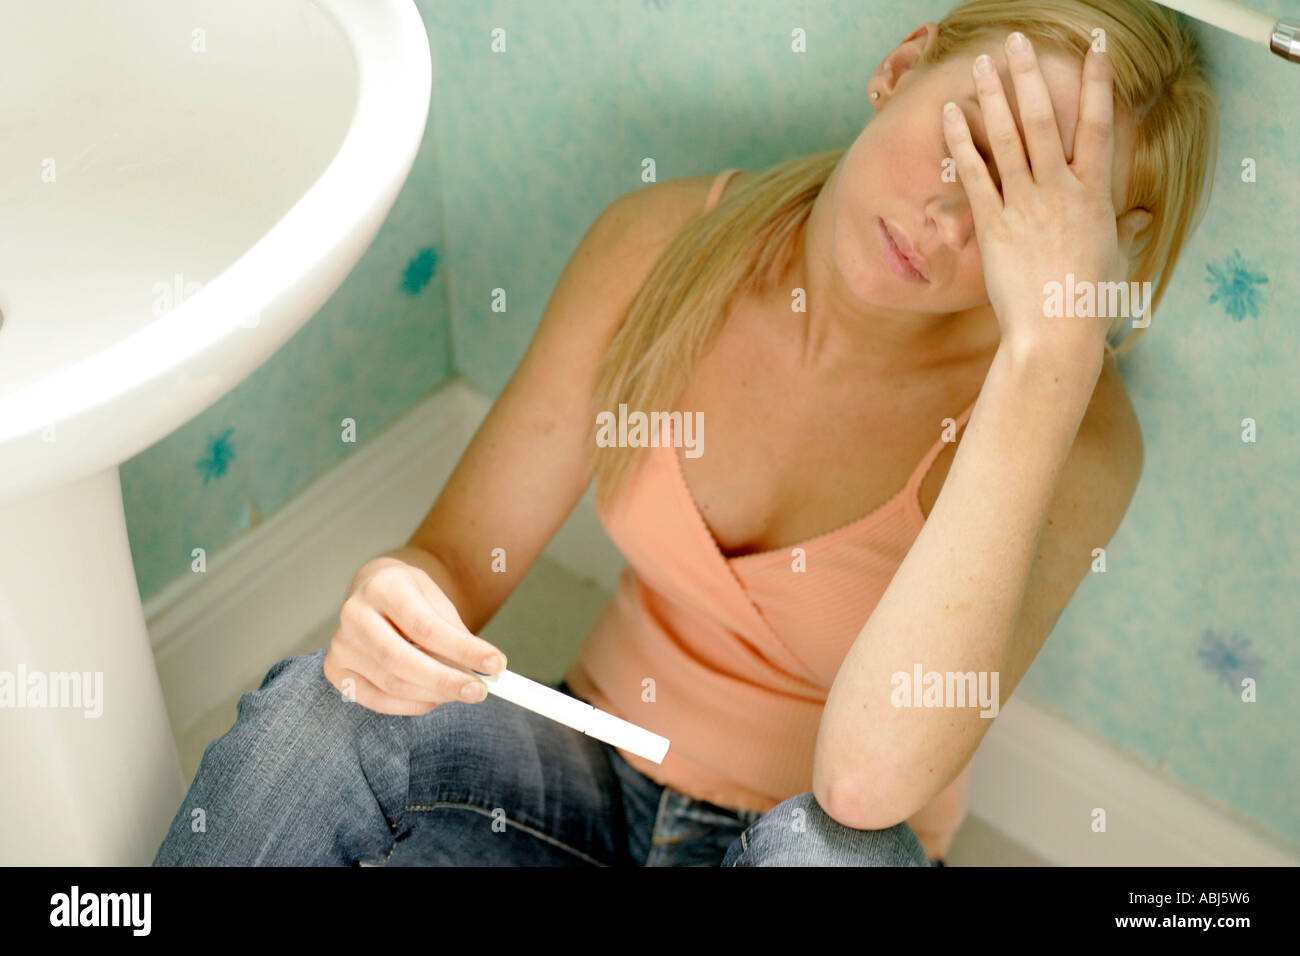 woman with results of pregnancy test Stock Photo